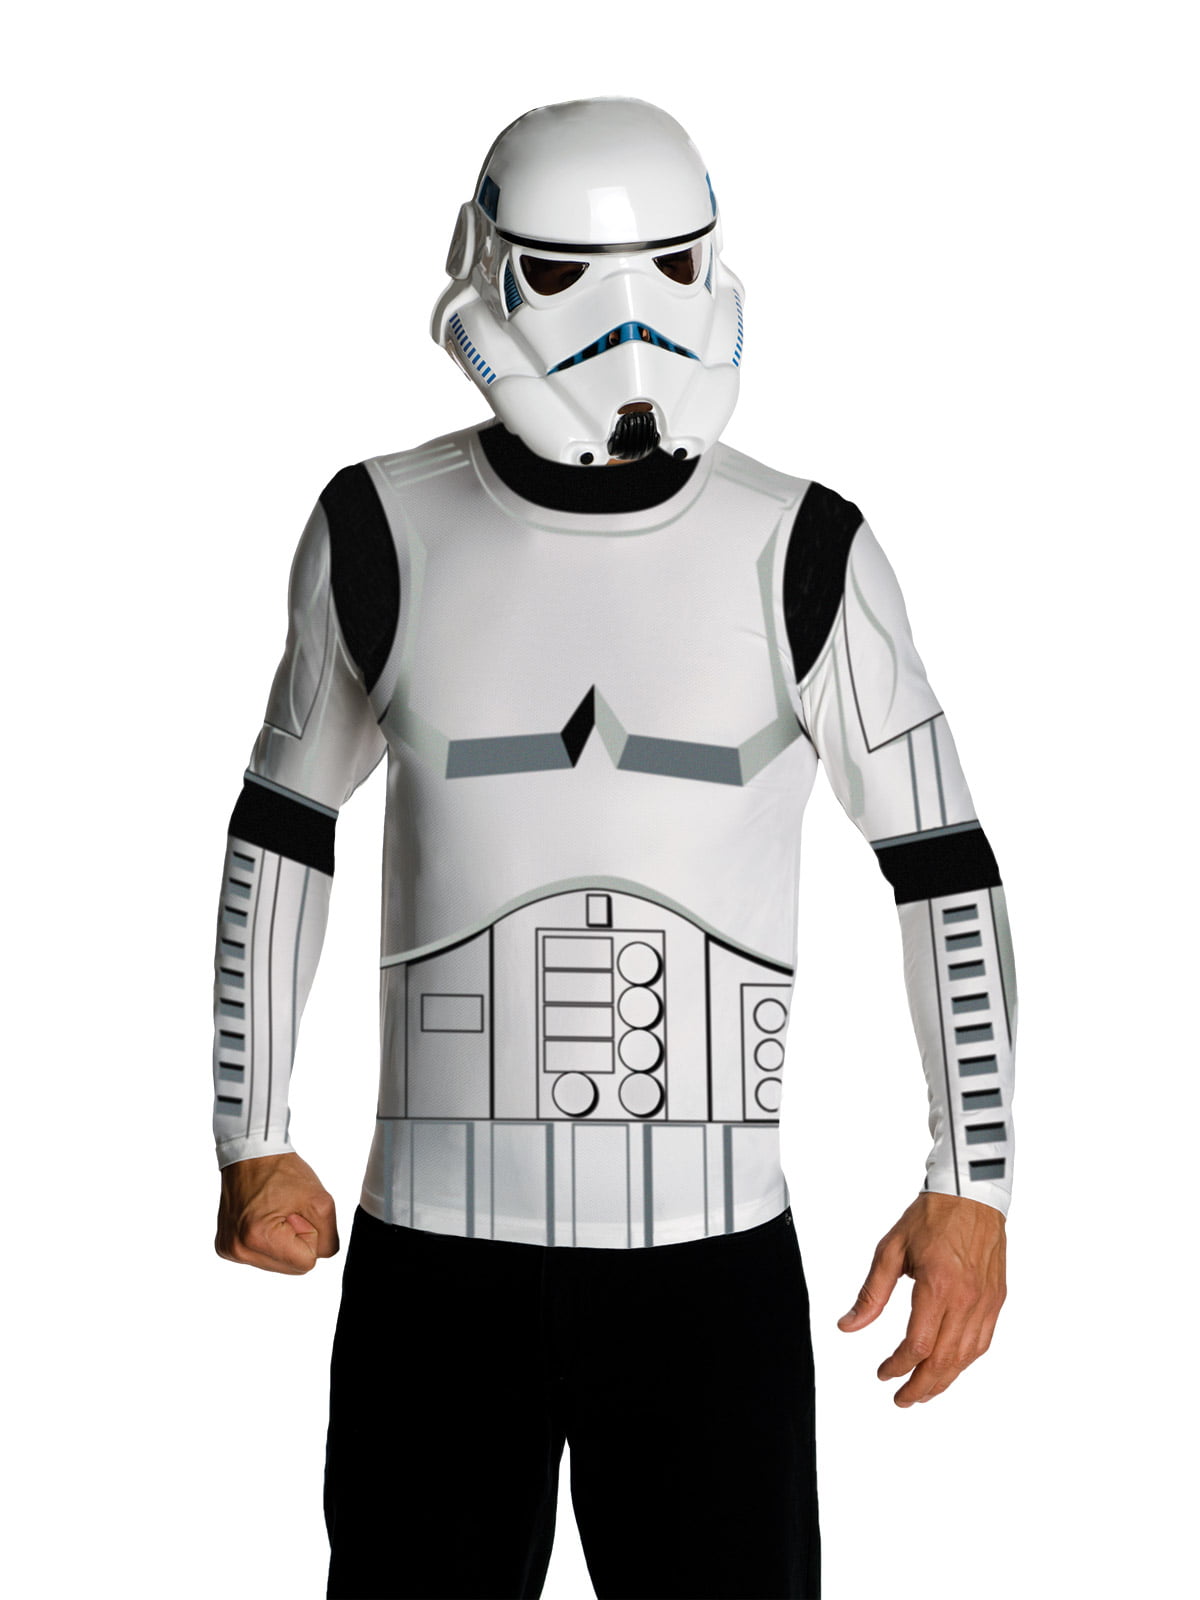 Featured image for “STORMTROOPER DRESS UPS: CLASSIC LONG SLEEVE TOPS”